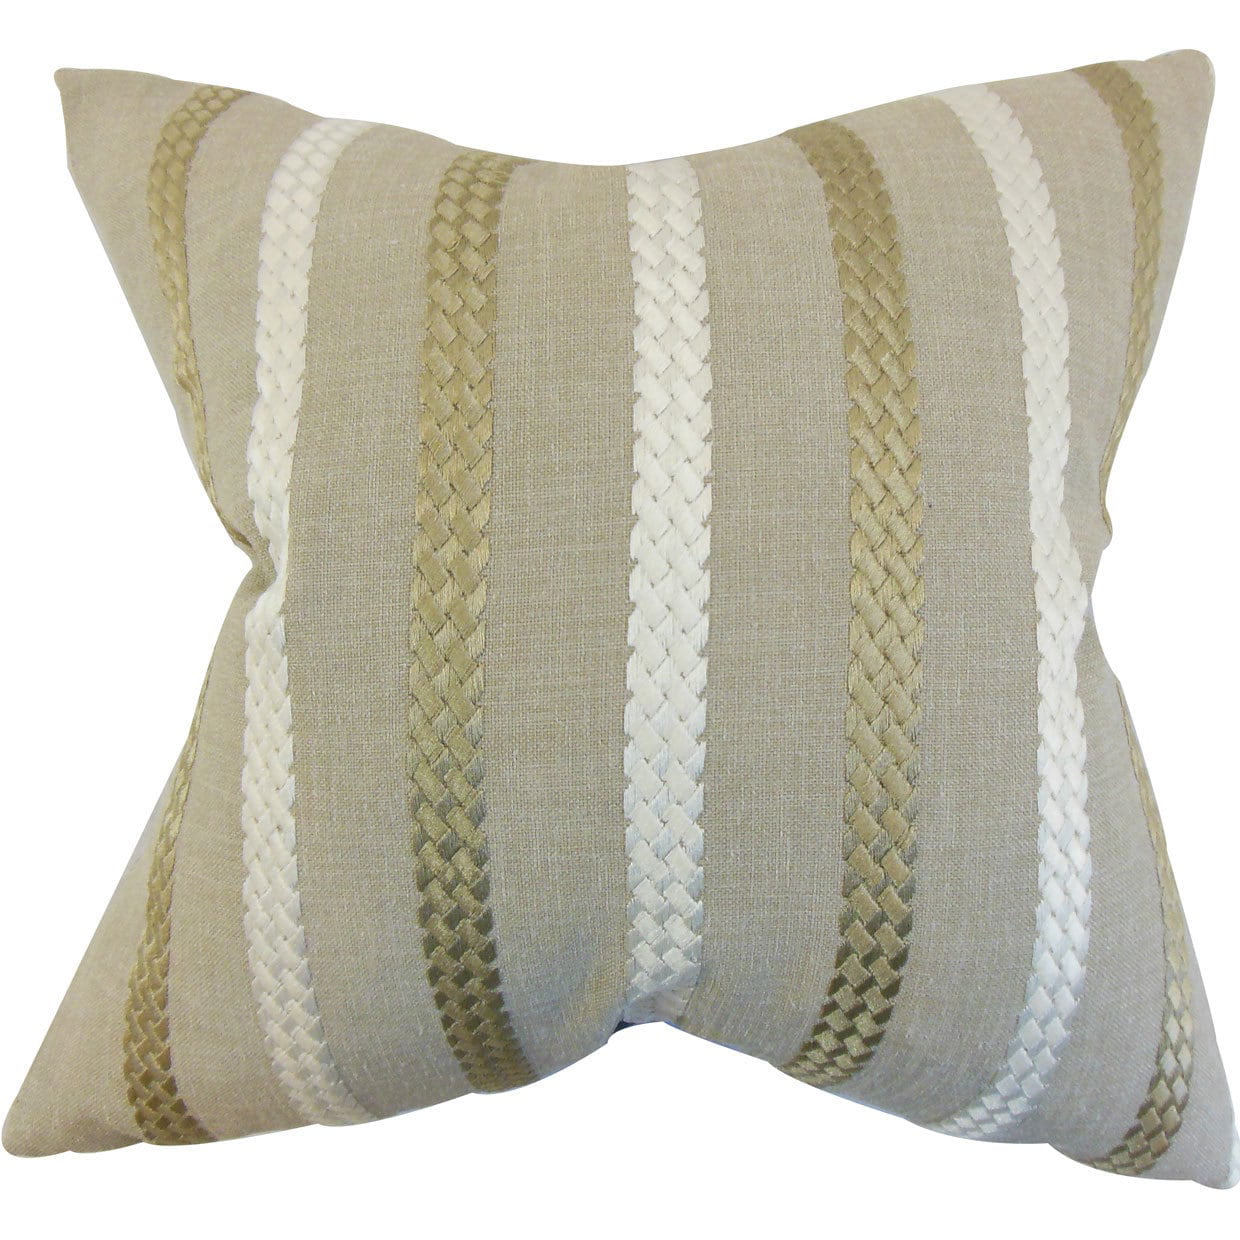 The Pillow Collection Emese Stripe Burlap Down Filled Throw Pillow 